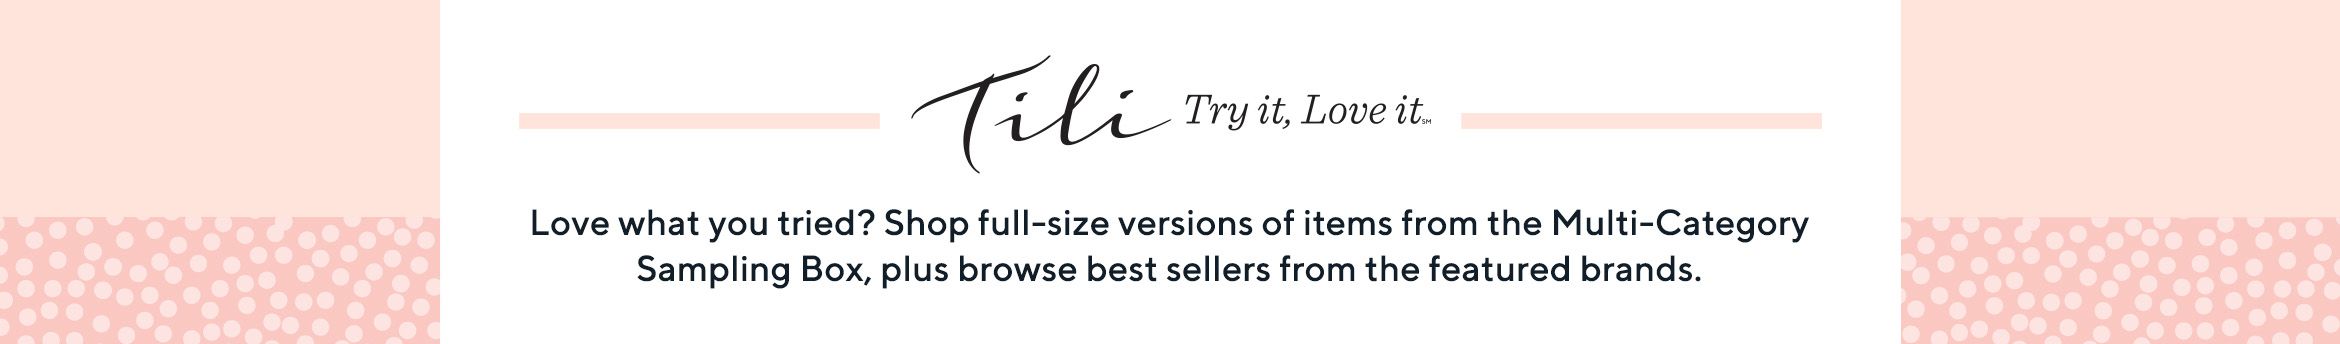 TILI Try it, Love it® Love what you tried? Shop full-size versions of items from the Multi-Category Sampling Box, plus browse best sellers from the featured brands.